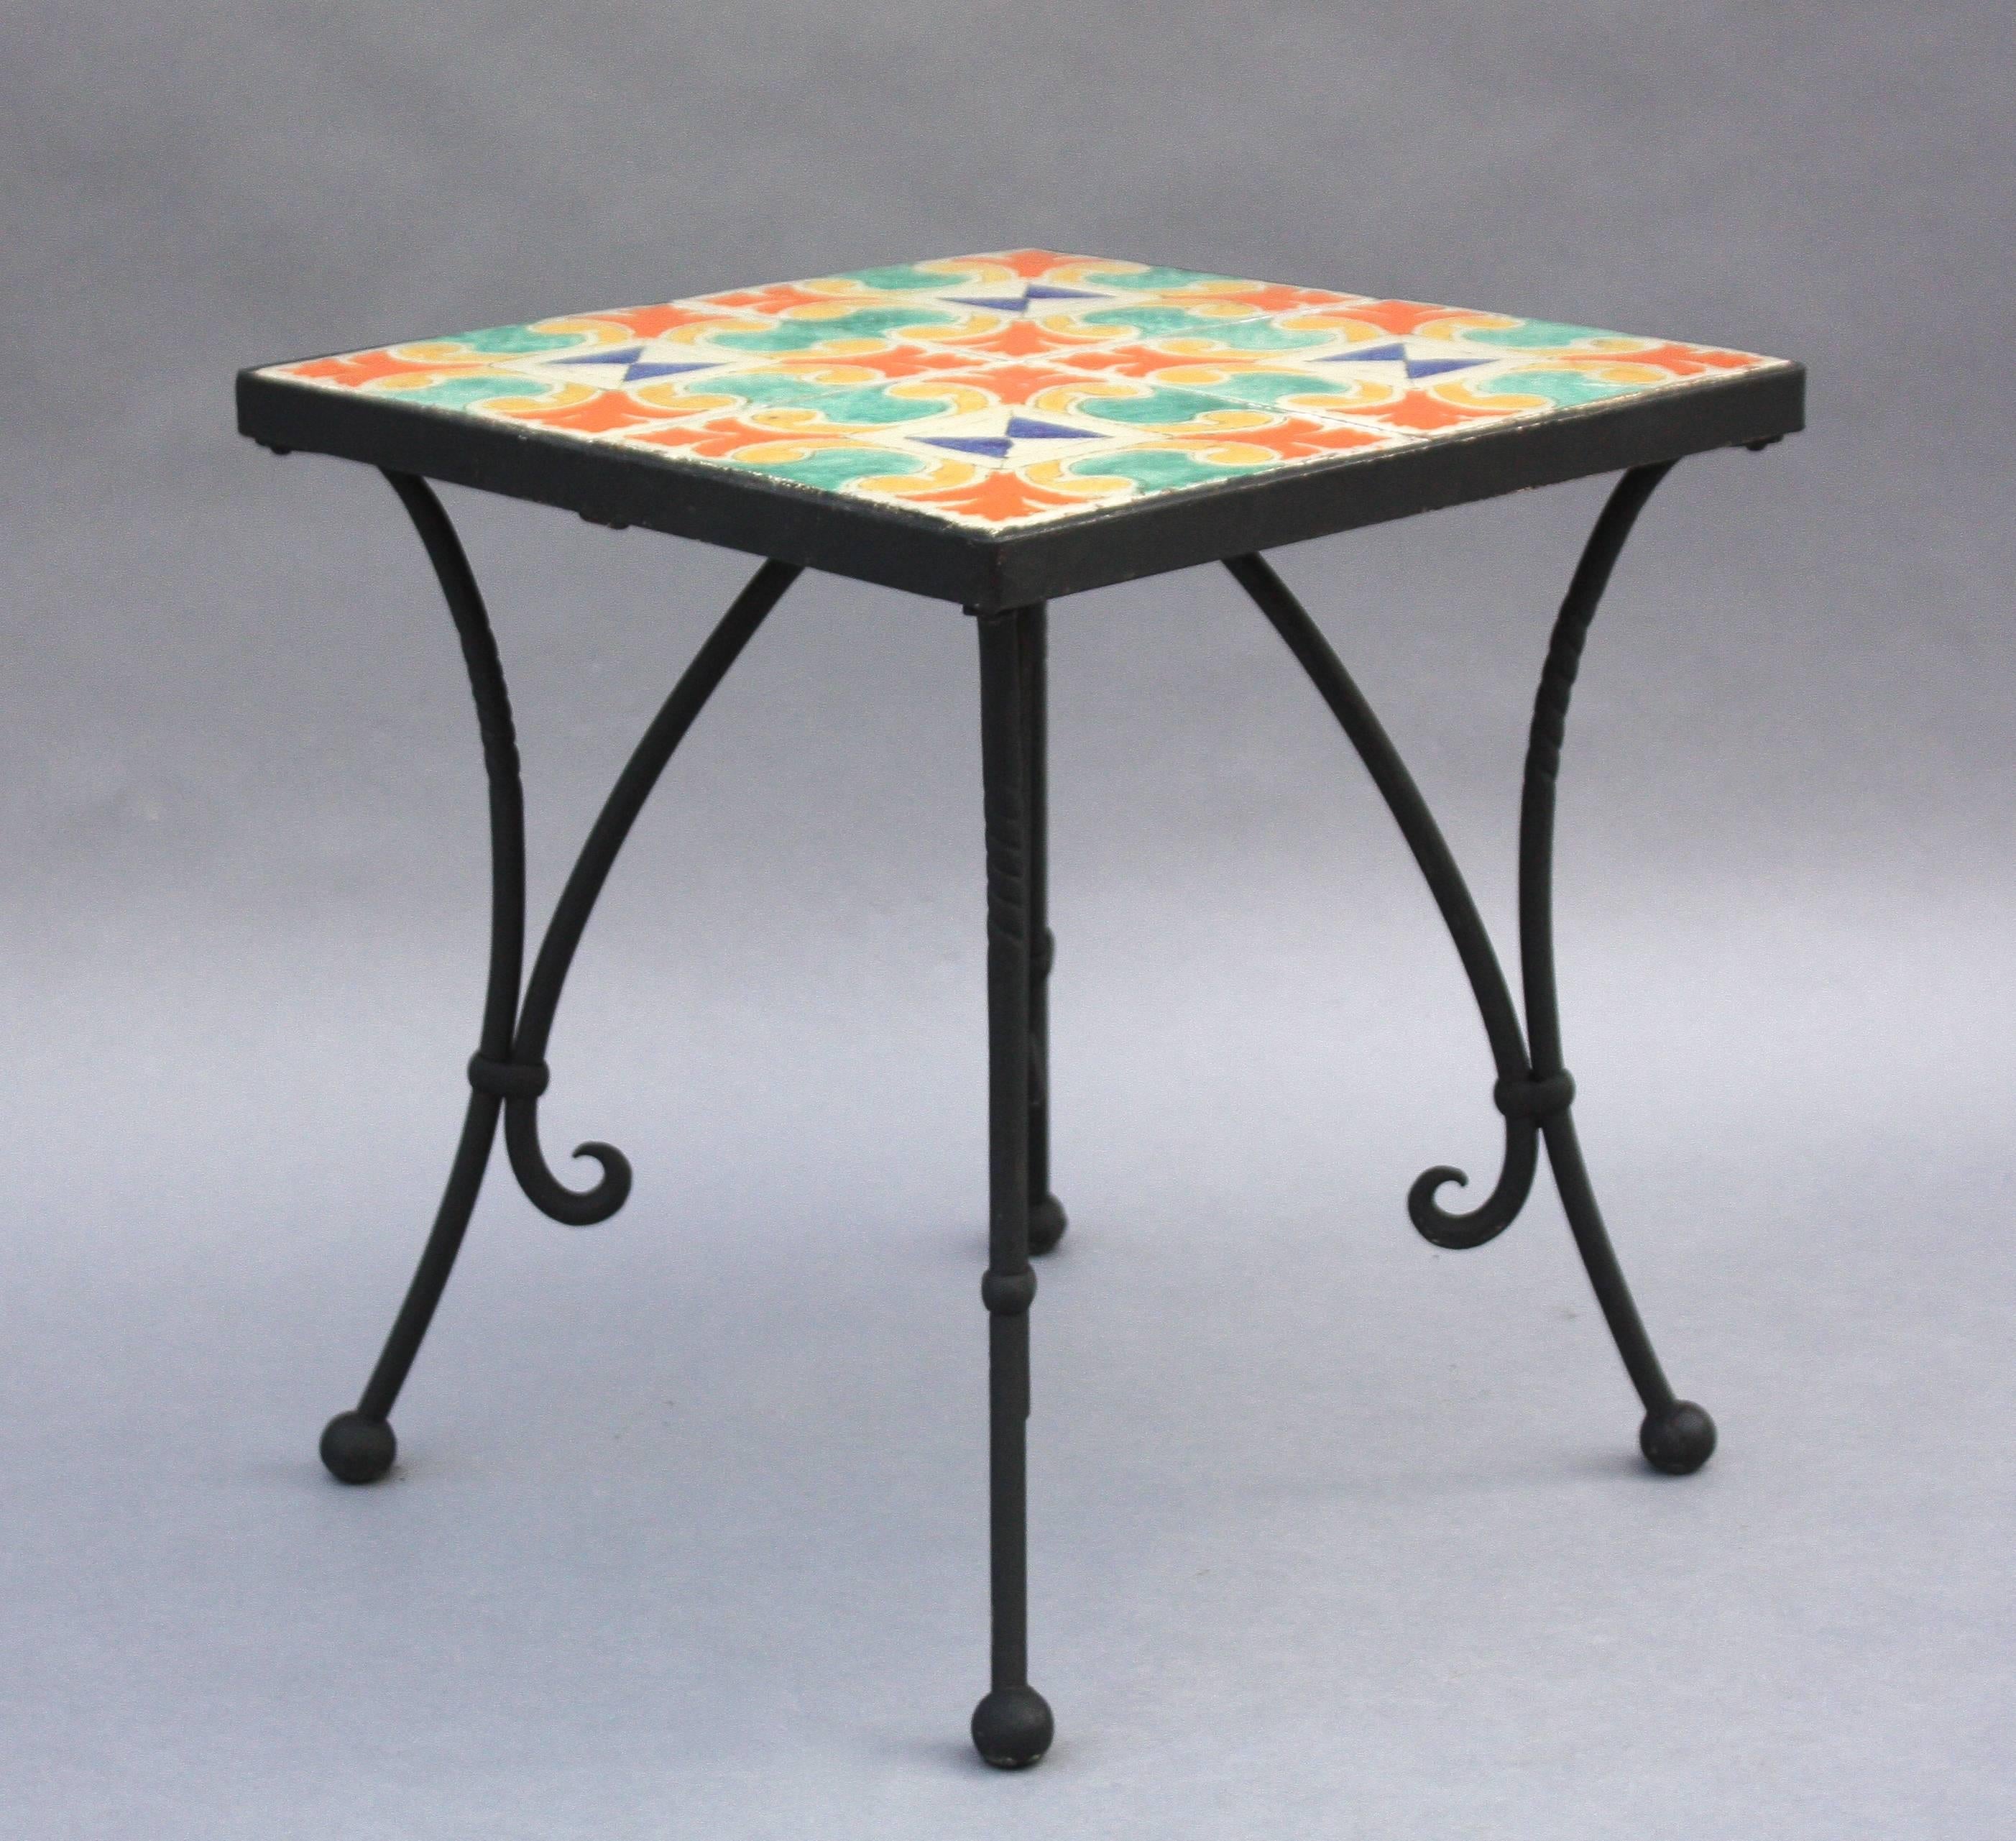 North American Antique 1920s Tile Table in Original Iron Frame